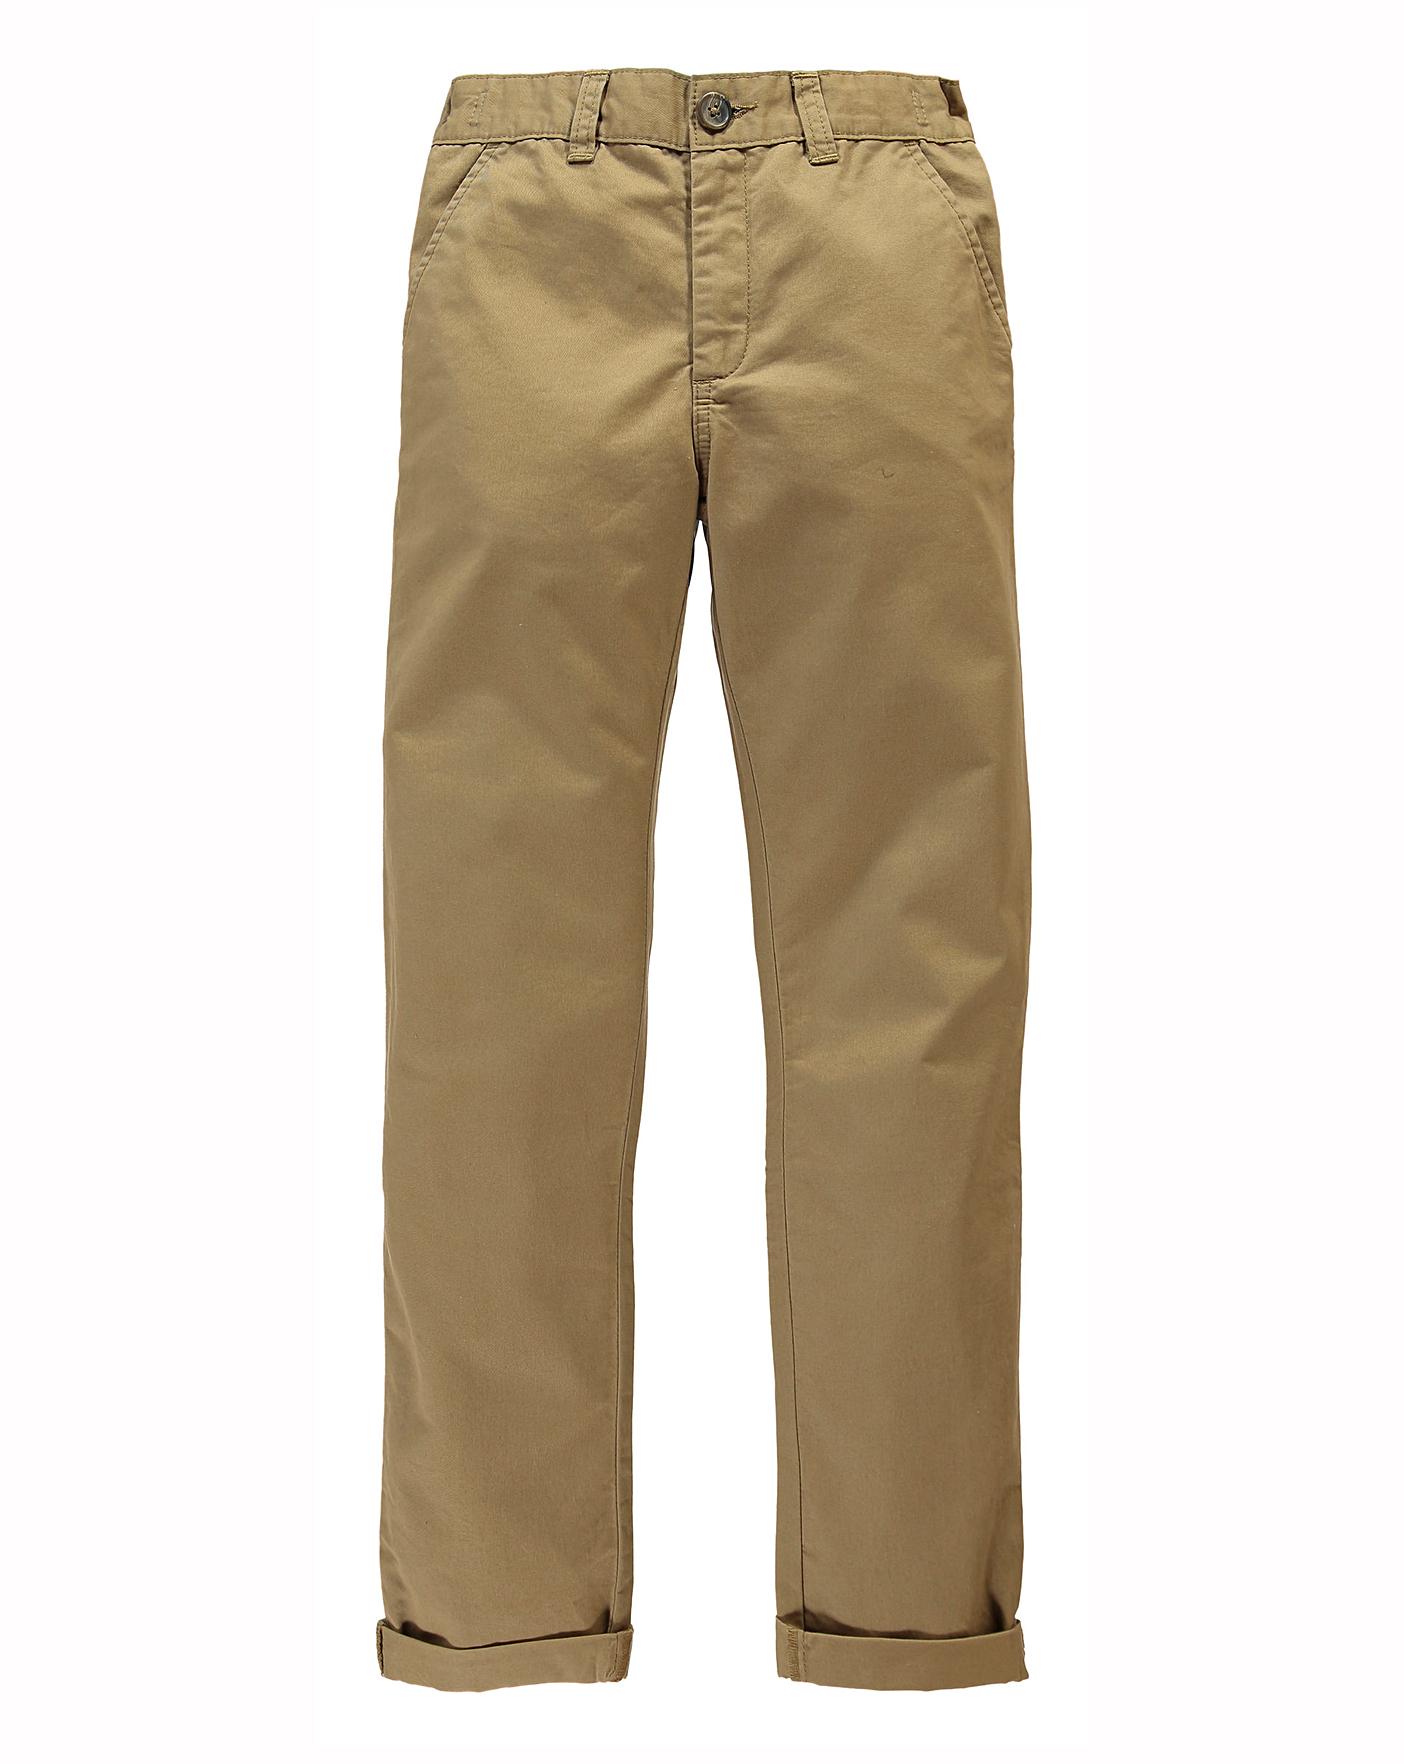 Boys Chino Trousers Generous Fit | The Kids Division